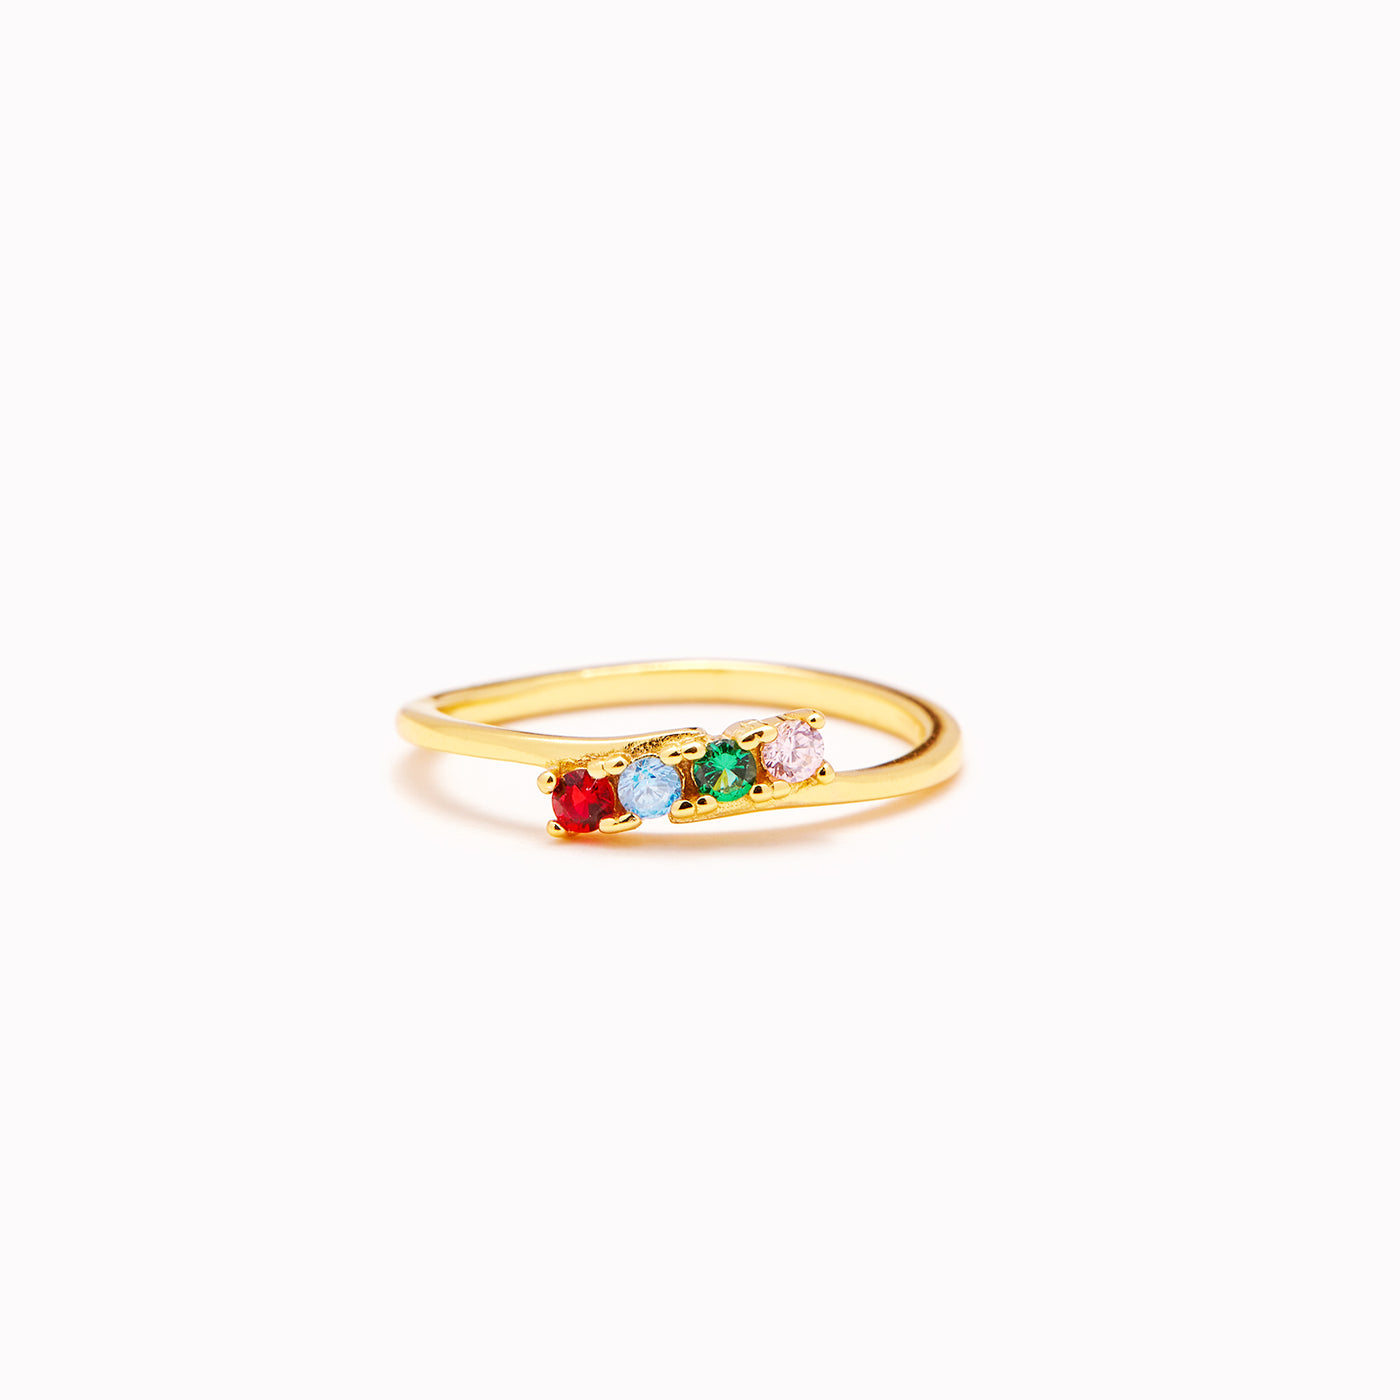 PERSONALIZED 1-6 BIRTHSTONES BYPASS RING